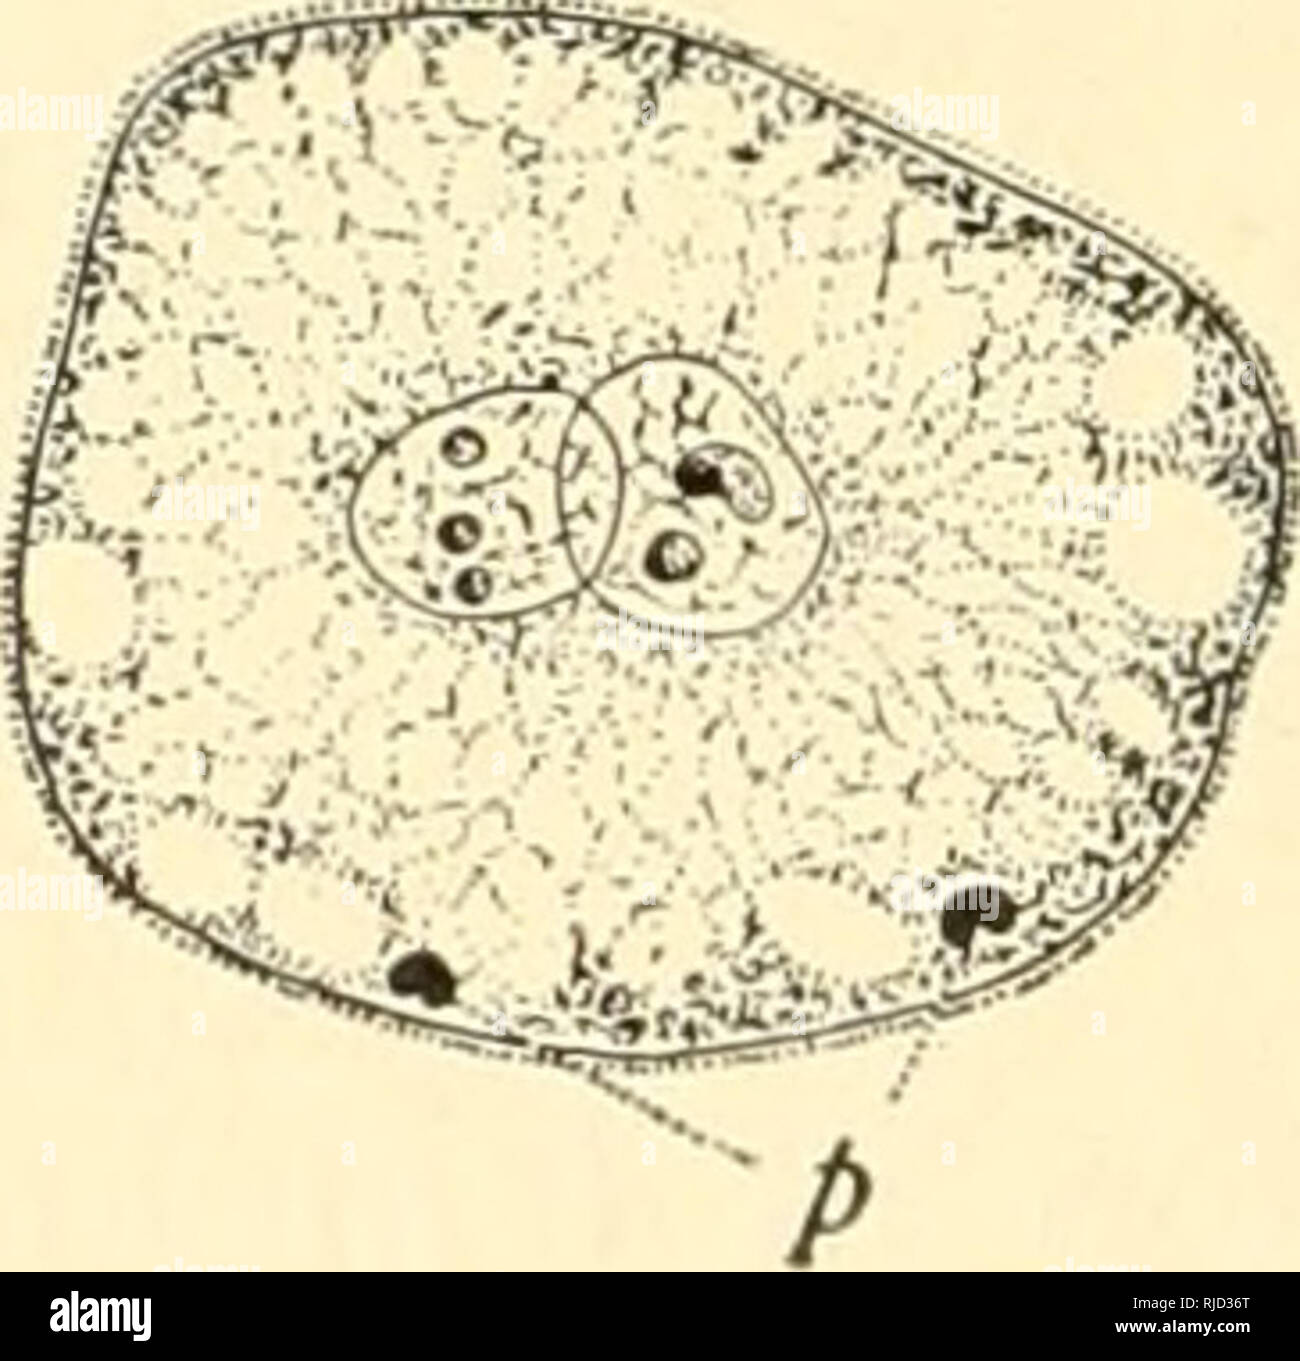 . The cell in development and inheritance. Cells. A C A B C Fig. 138. — Conjugation and formation of the polar bodies in Adbiophrys. [SCHAUDINN.] A. Union of the gametes; first polar spindle. B. Fusion of the cell-bodies; a single polar body near the periphery of each. C. Fusion of the nuclei. the final division. In the gregarines Wolters ('91) has observed the formation of an actual polar body as a small cell segmented off from each of the two conjugating animals soon after their union ; but the number of chromo- somes was not deter- P' fi':''r&quot;'^h:^ mined. Schaudinn ('96, 2) has obser Stock Photo